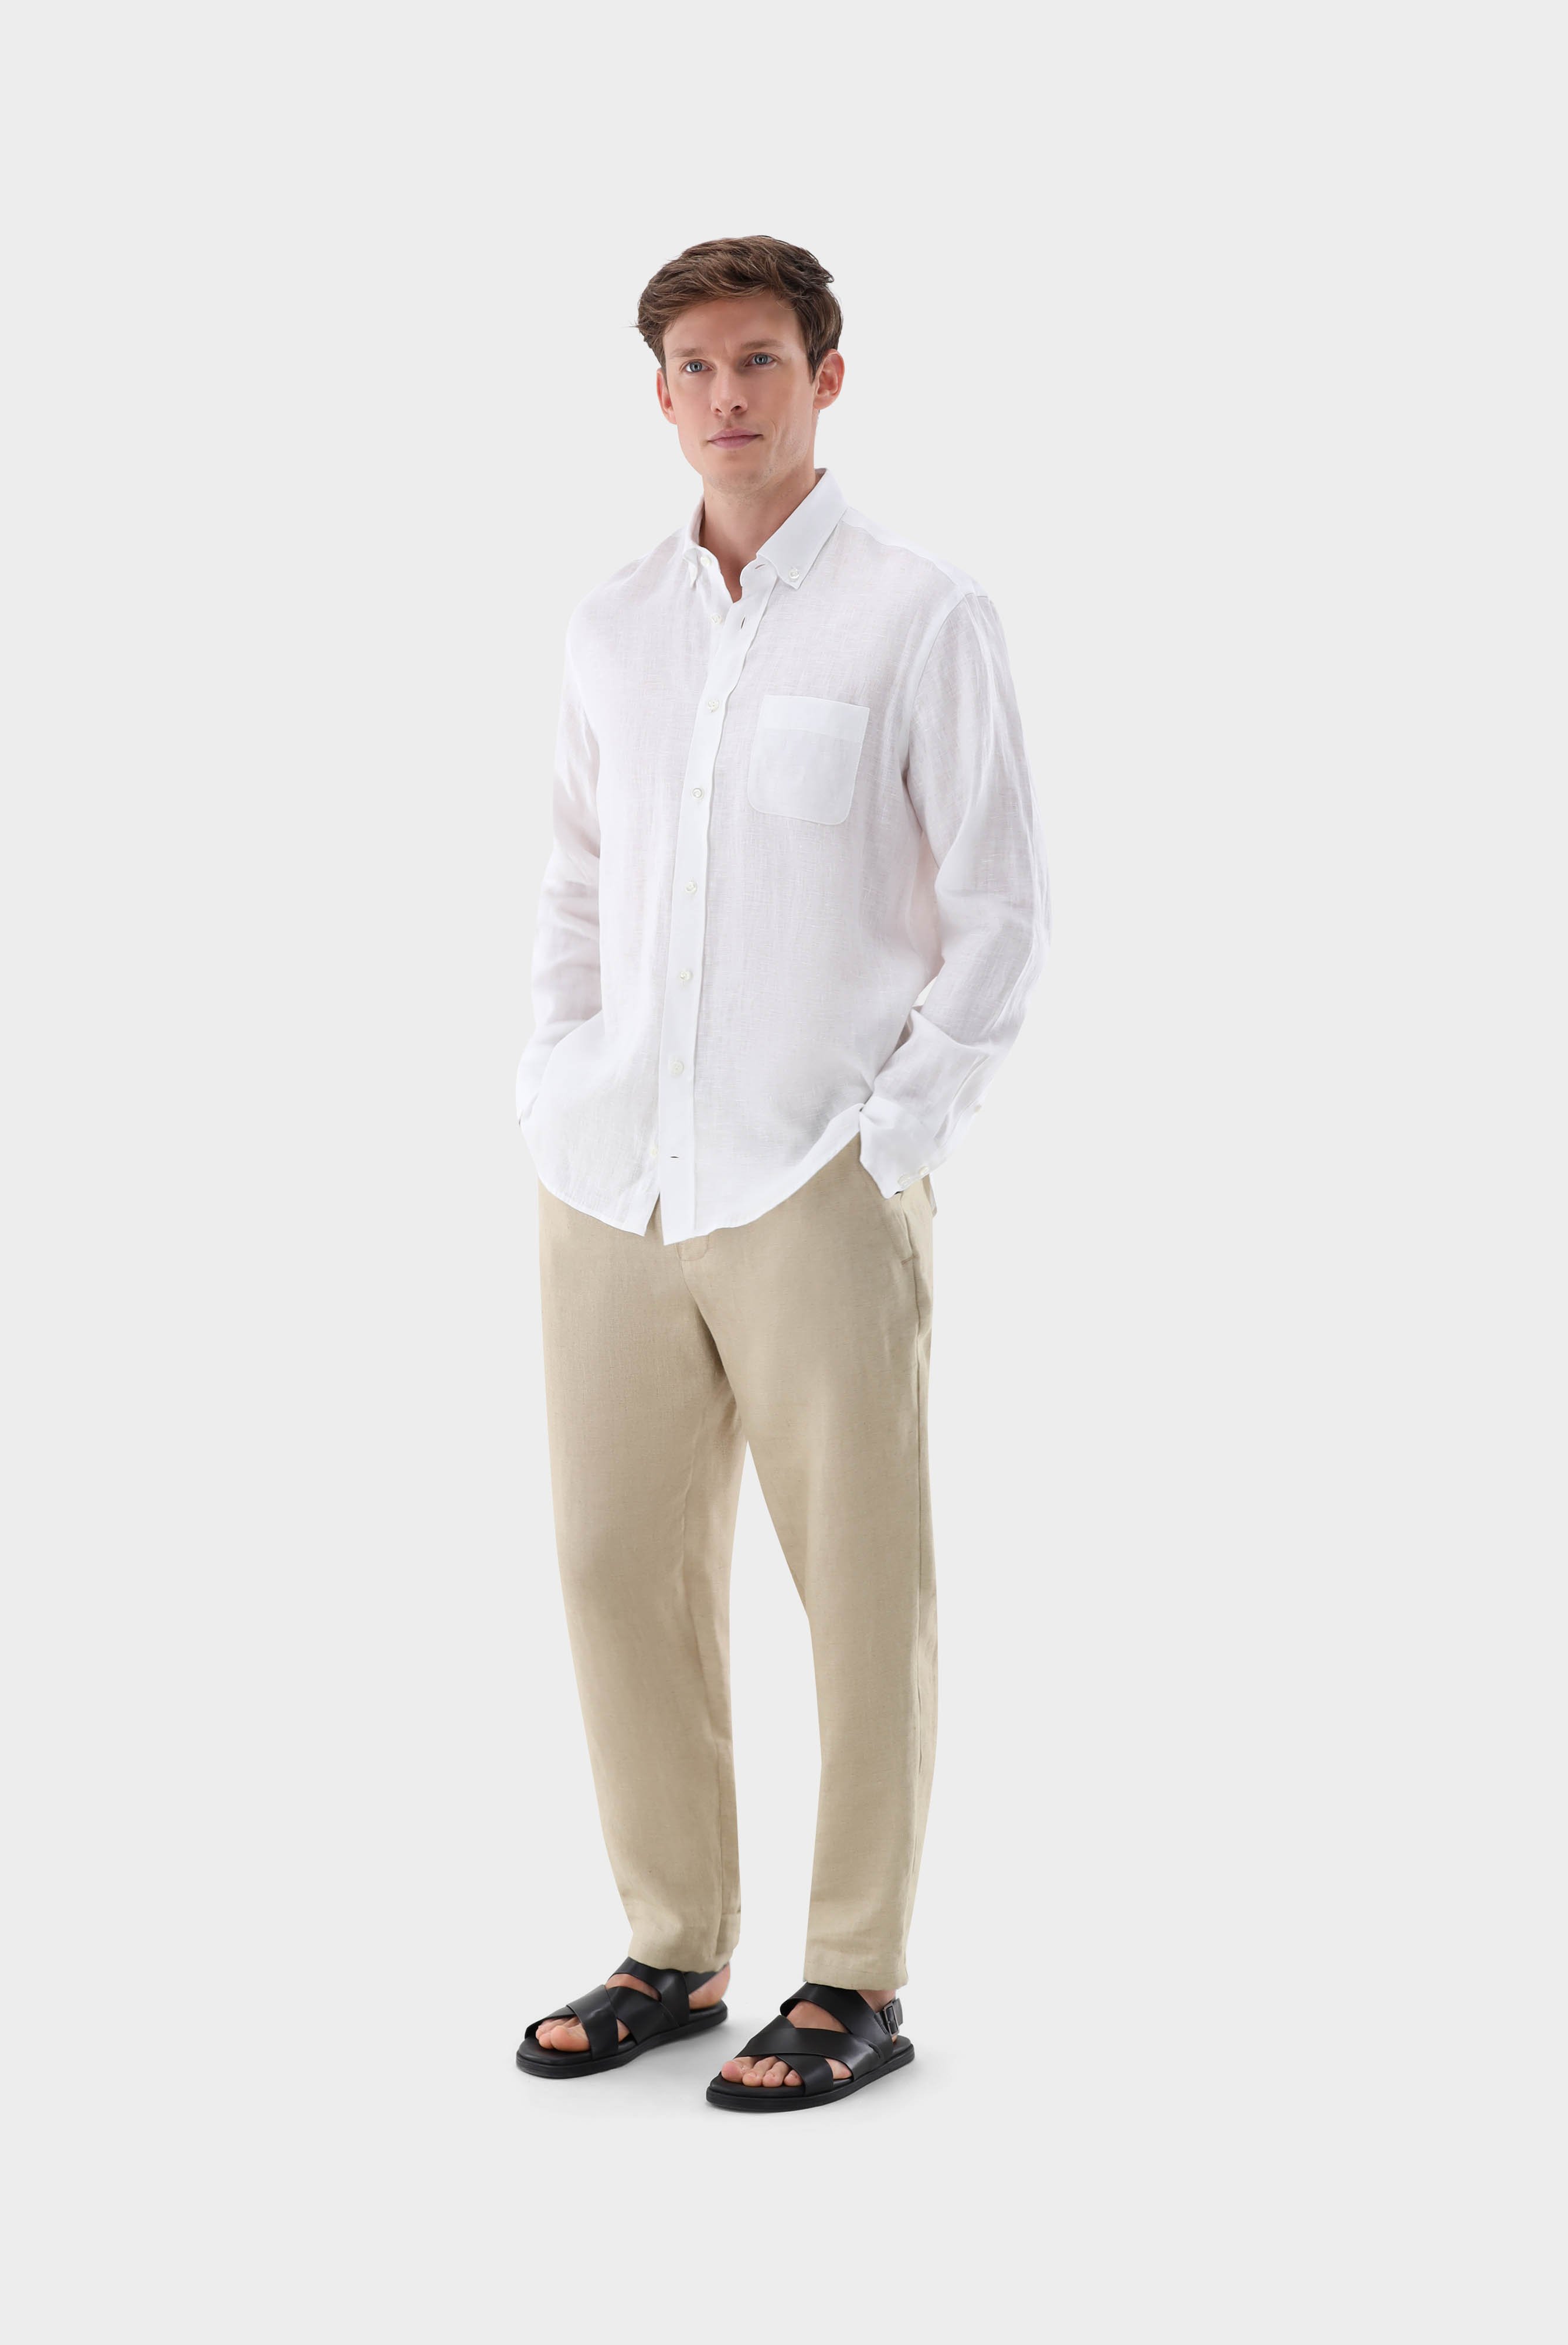 Casual Shirts+Linen Button-Down Collar Shirt Tailor Fit+20.2013.9V.150555.000.41